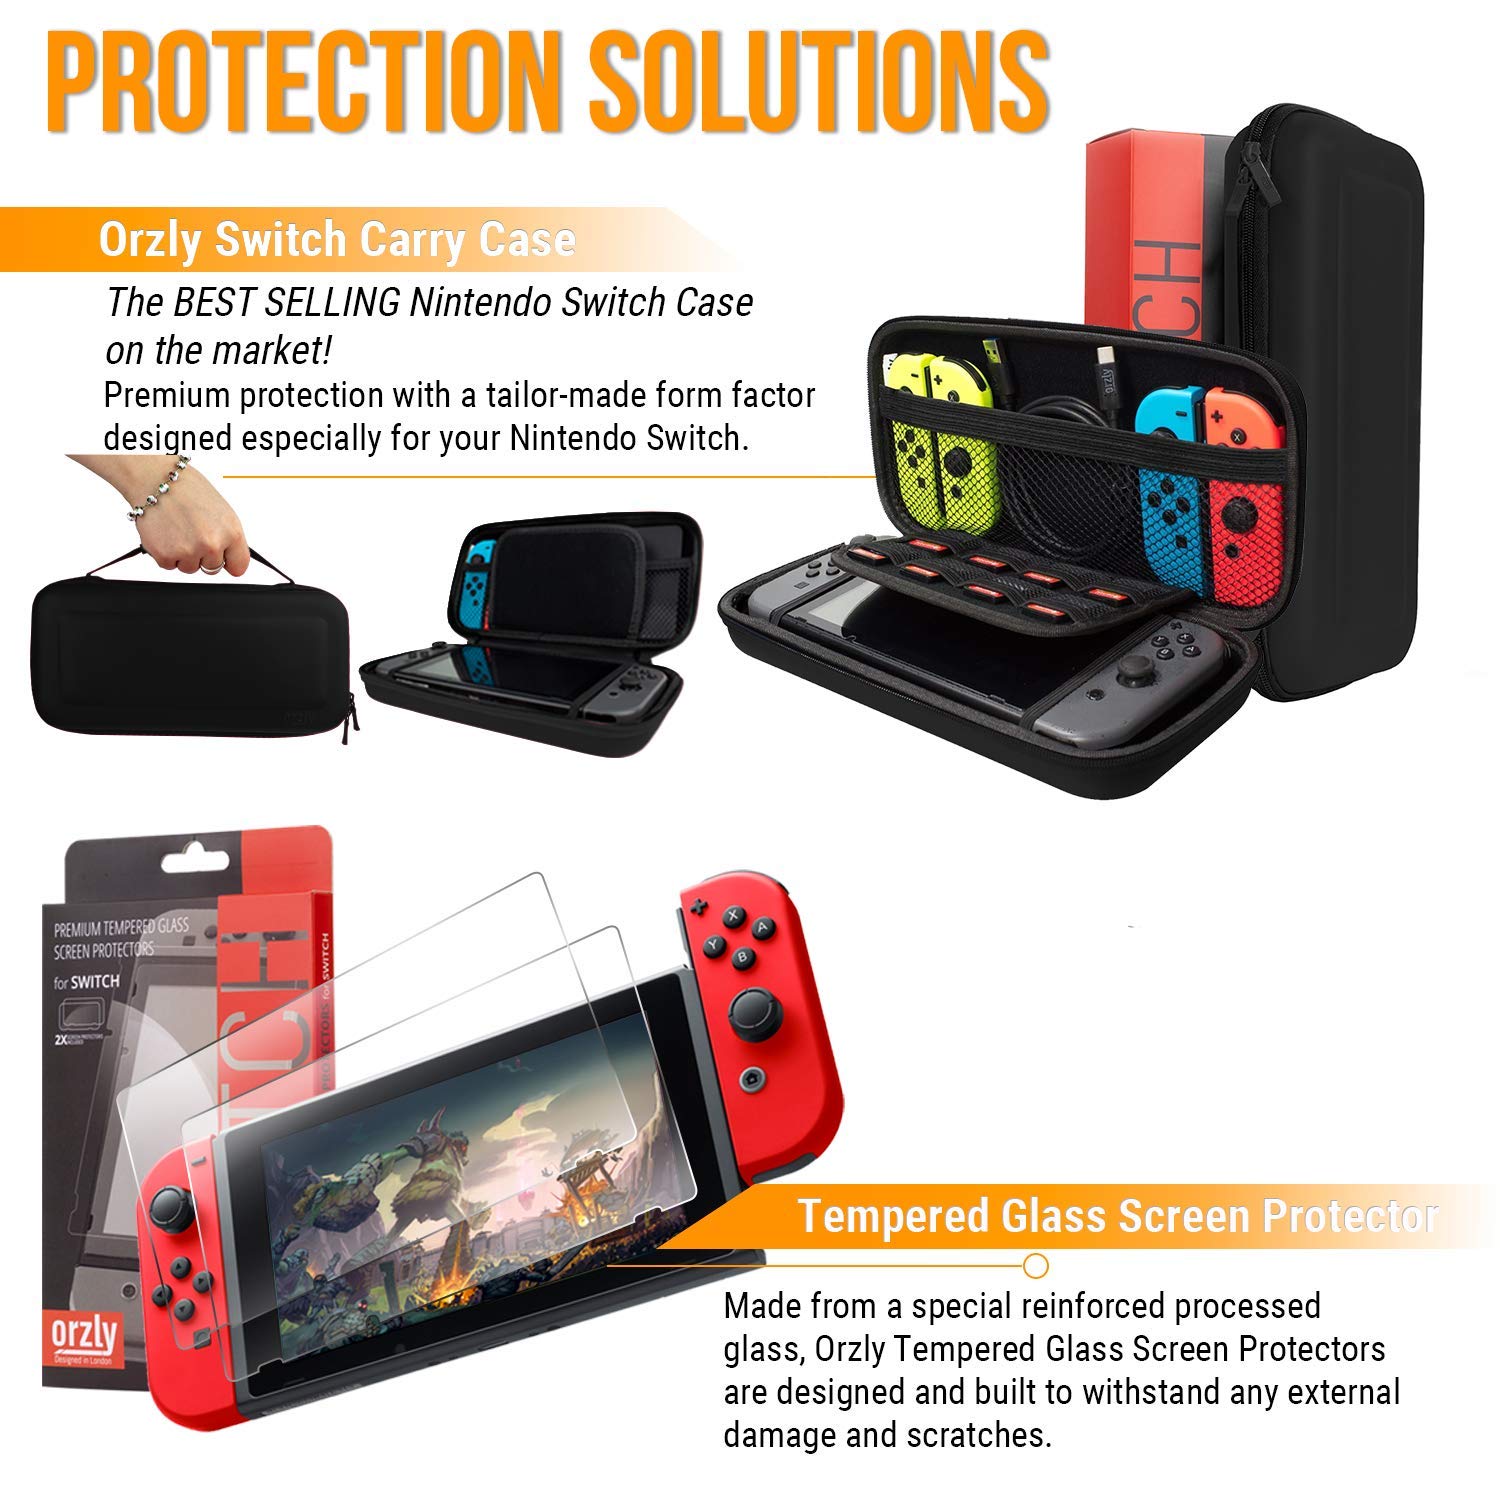 Orzly Accessory Bundle Kit designed for Nintendo Switch Accessories Geeks and OLED console users Case and Screen Protector, Joycon Grips and Wheels for enhanced games play and more - Jet black